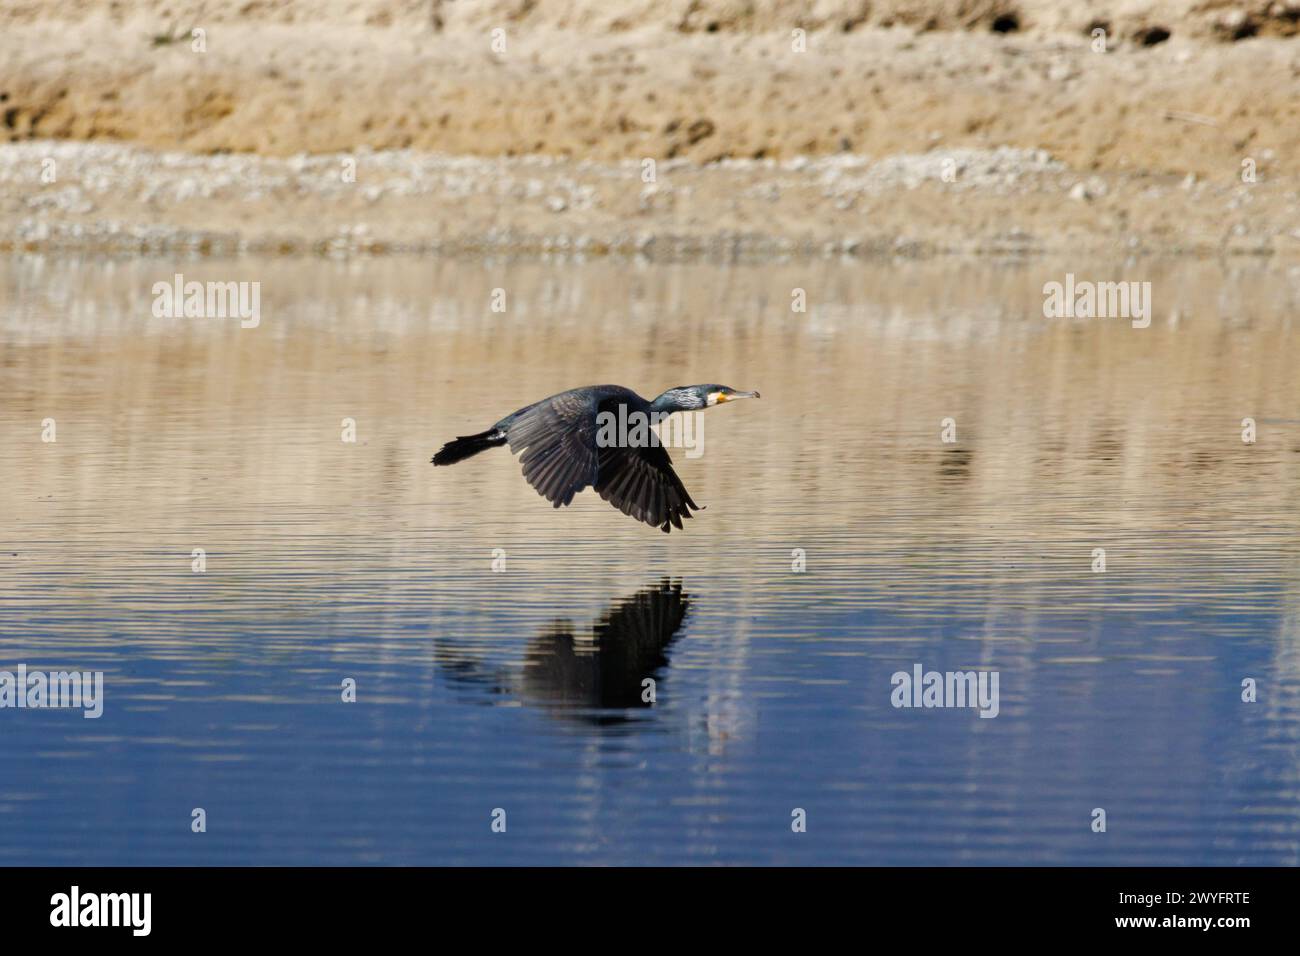 Great cormorant (Phalacrocorax carbo) flying over the water of the Beniarres swamp, Spain Stock Photo